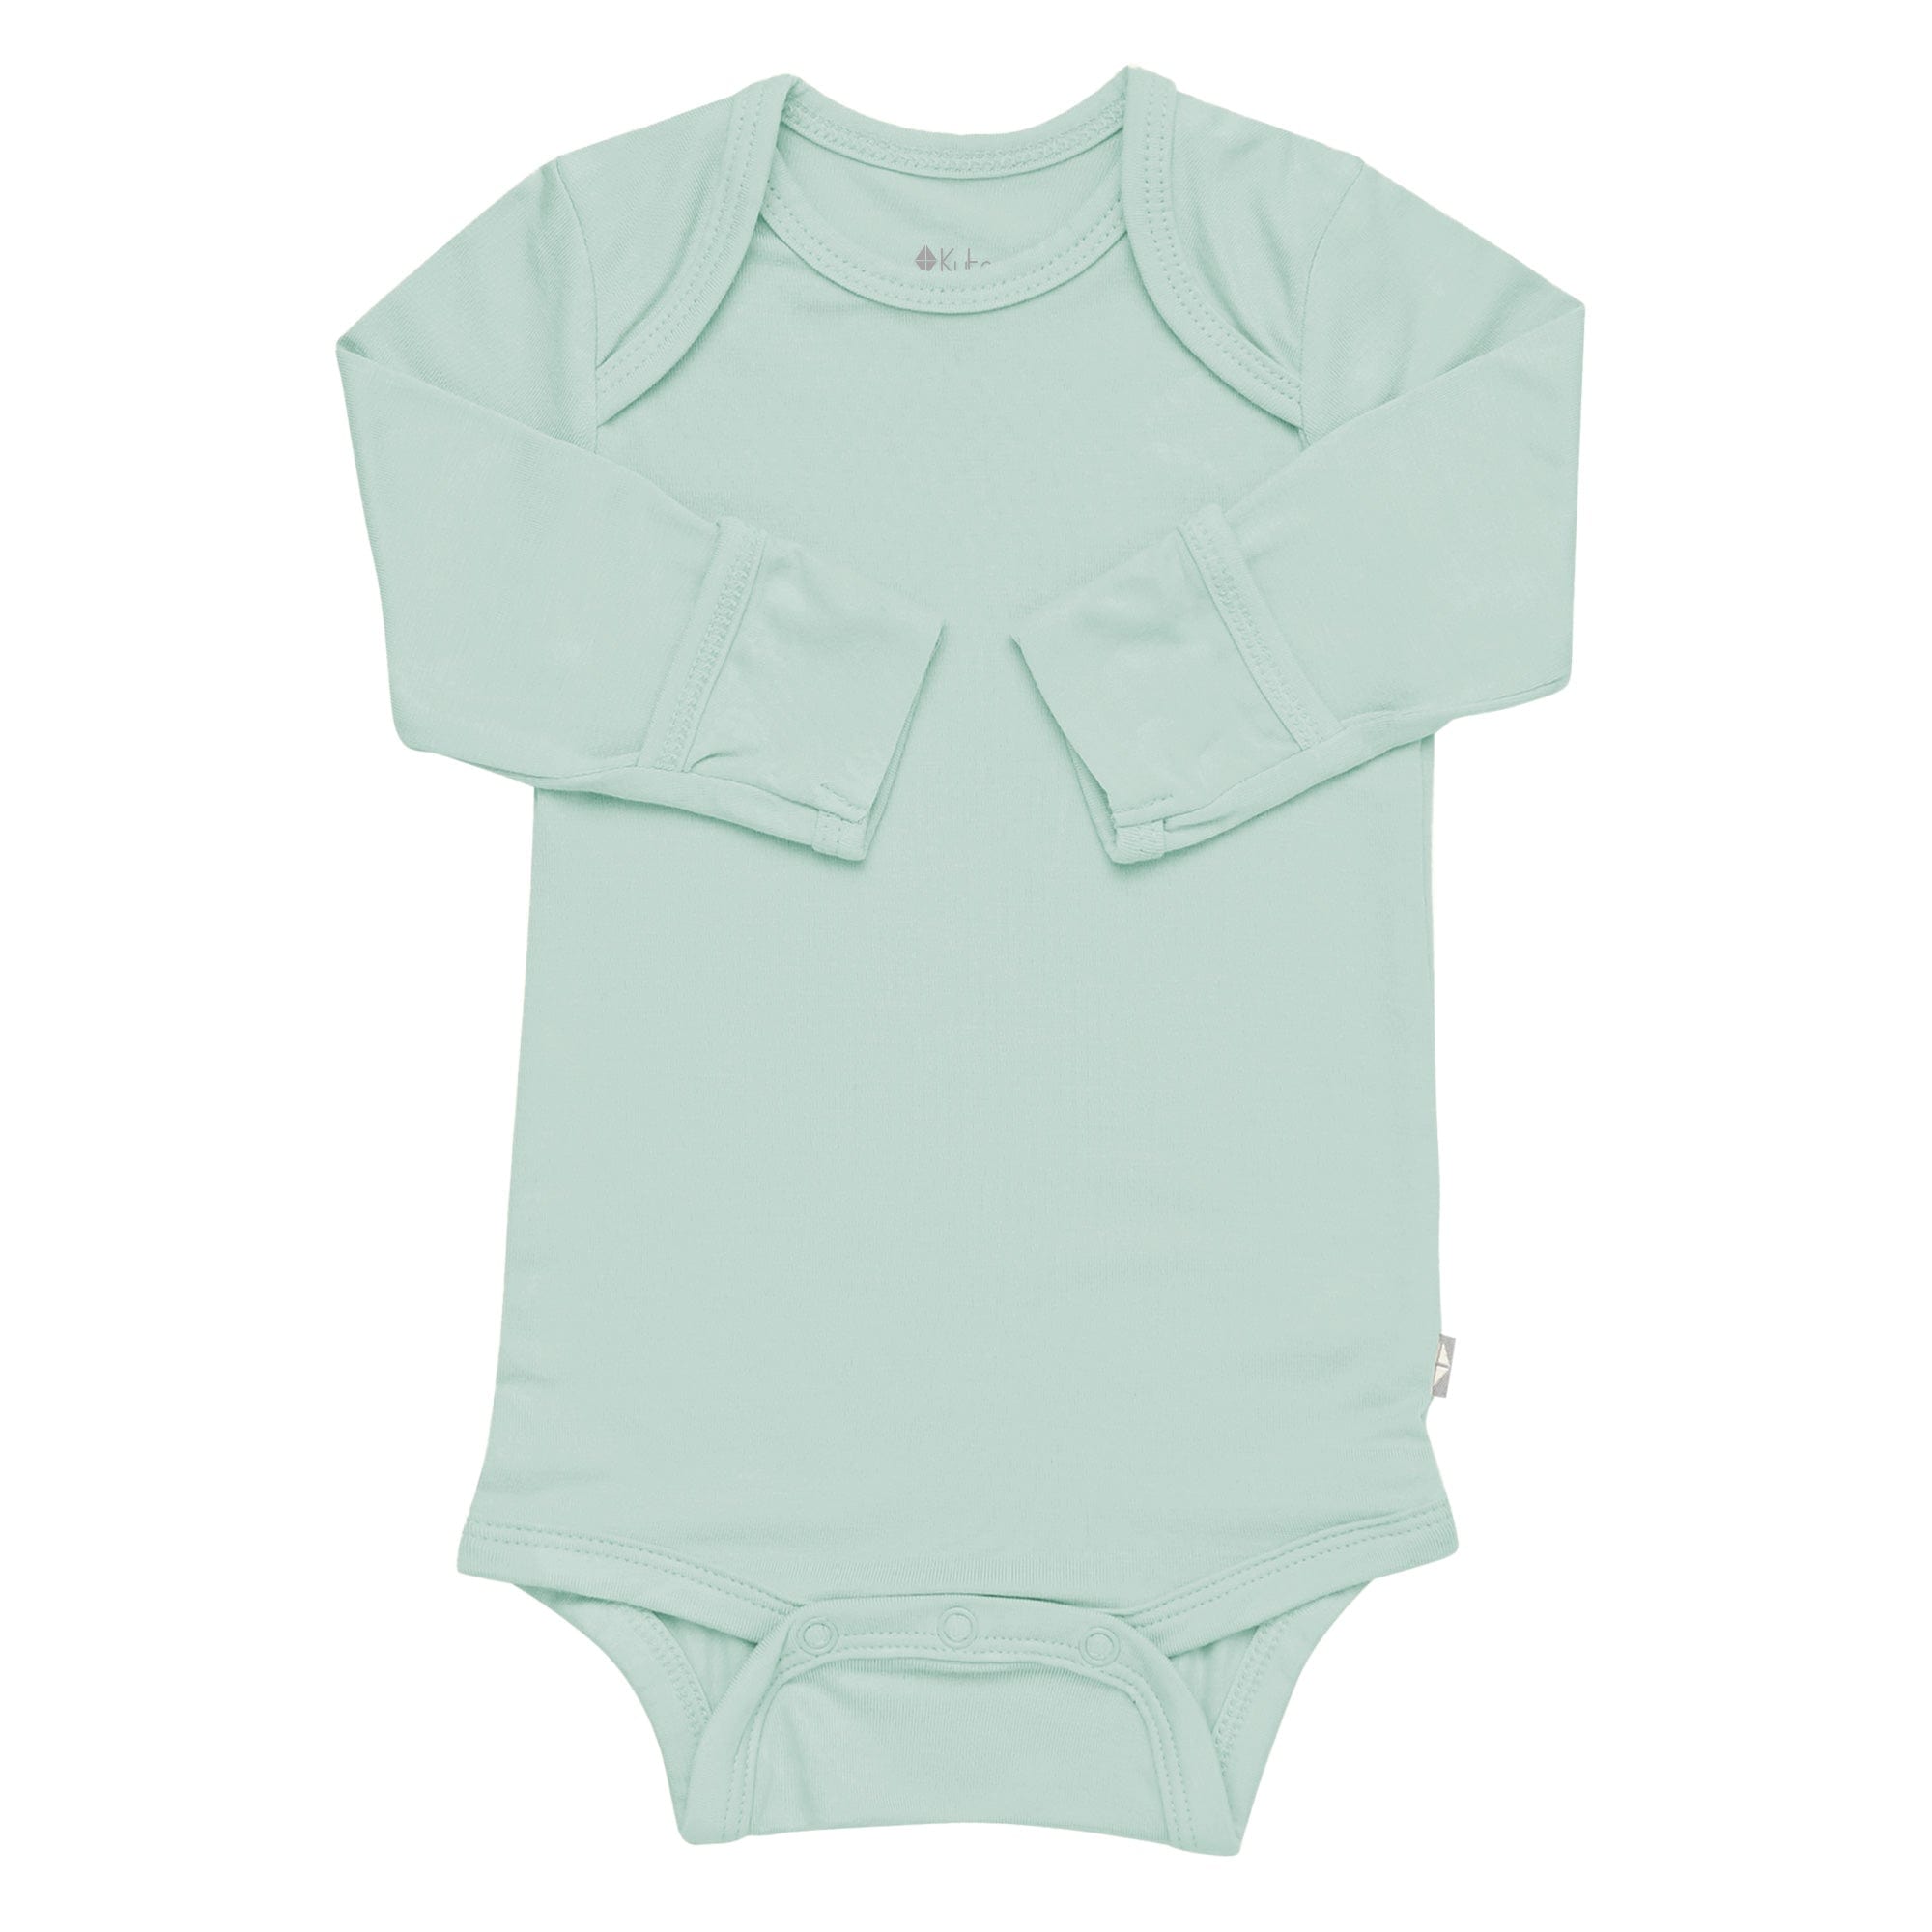 Everyone Loves An Polish Girl Baby Long Slevve Bodysuit Unisex Gifts  (White, 3-6 Months) 